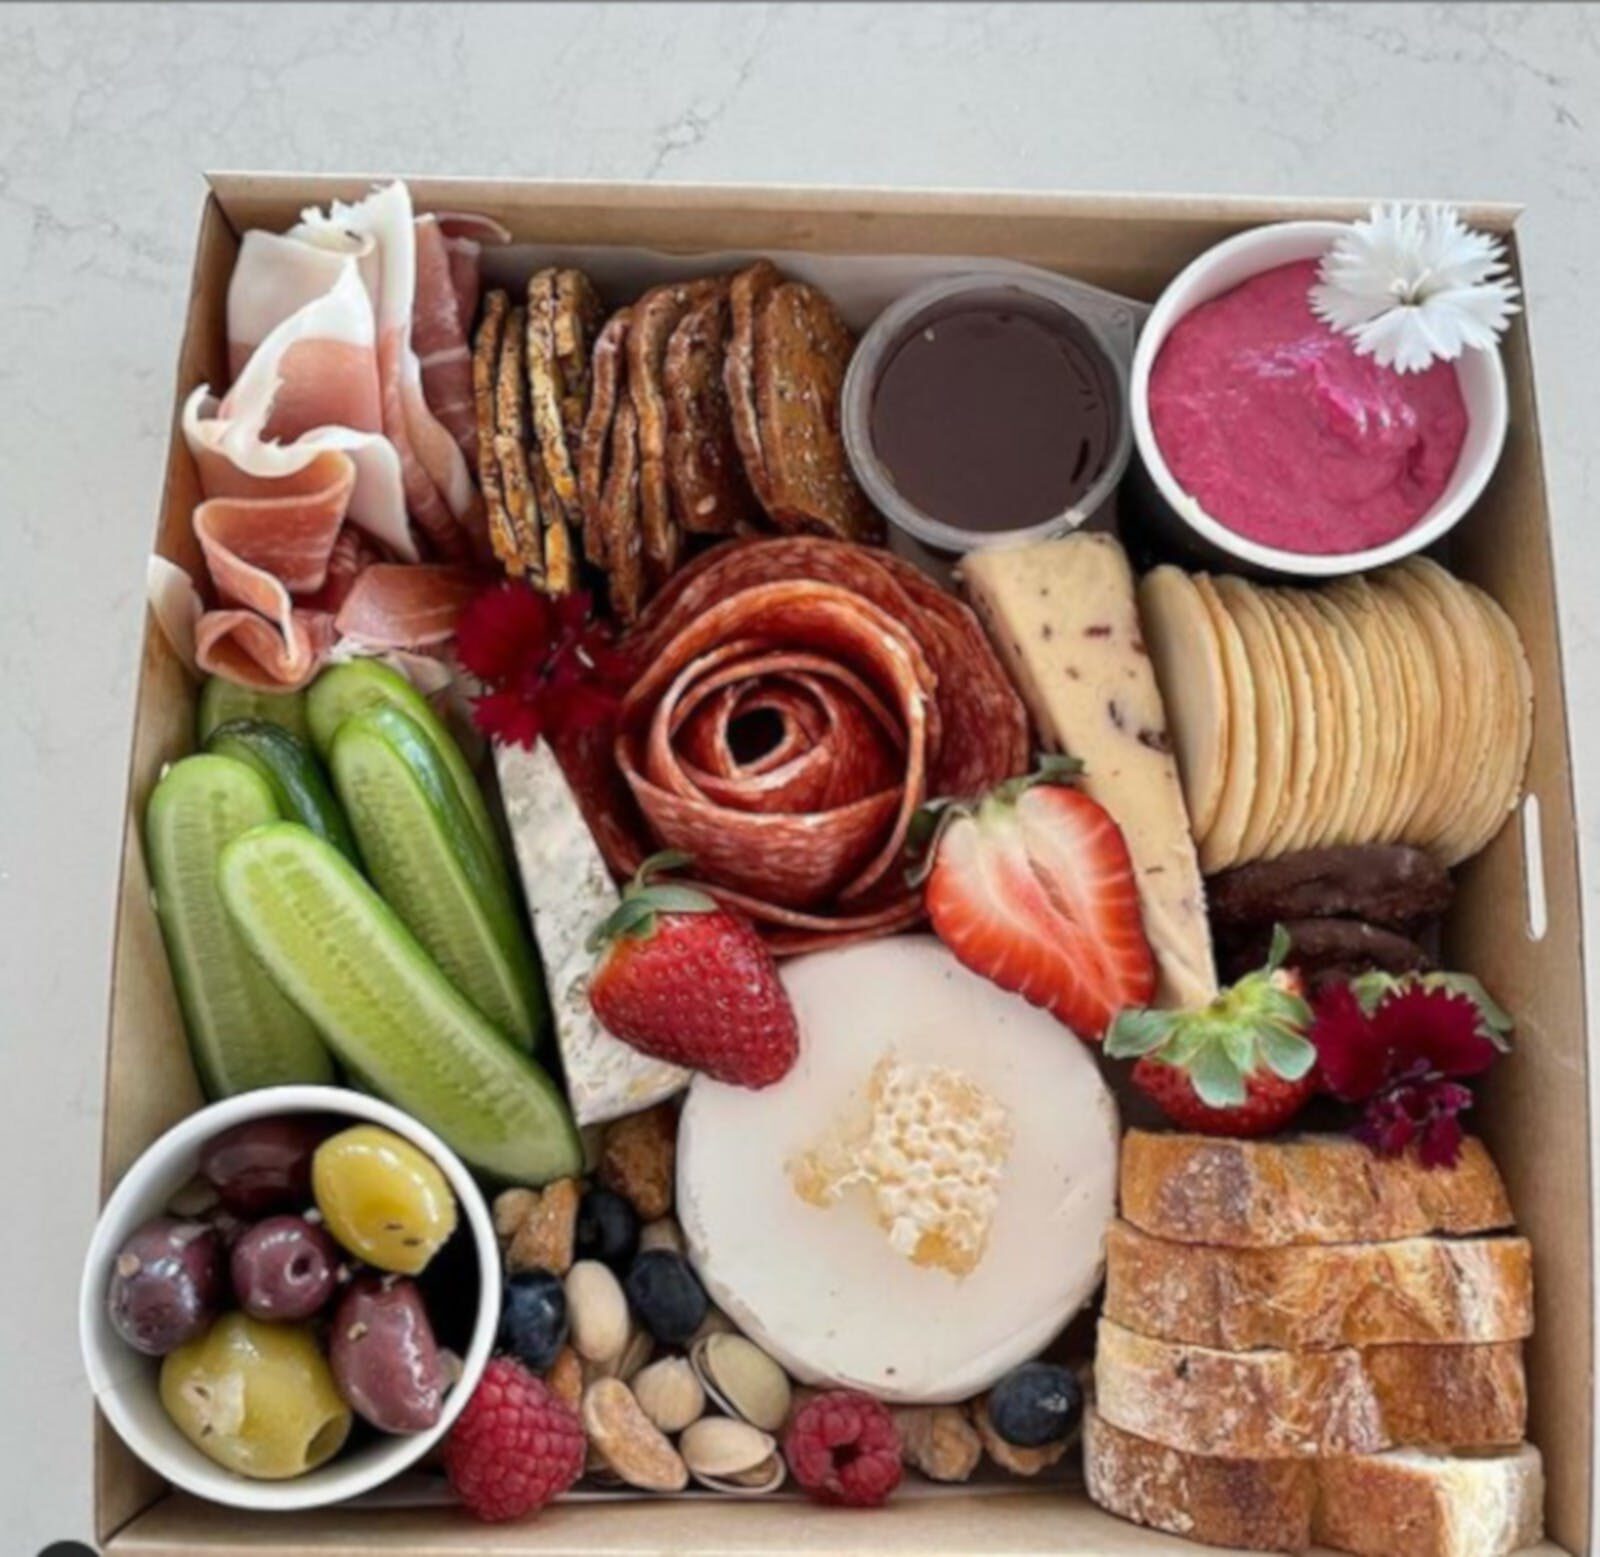 A colourful platter of fruit, cheeses and crackers